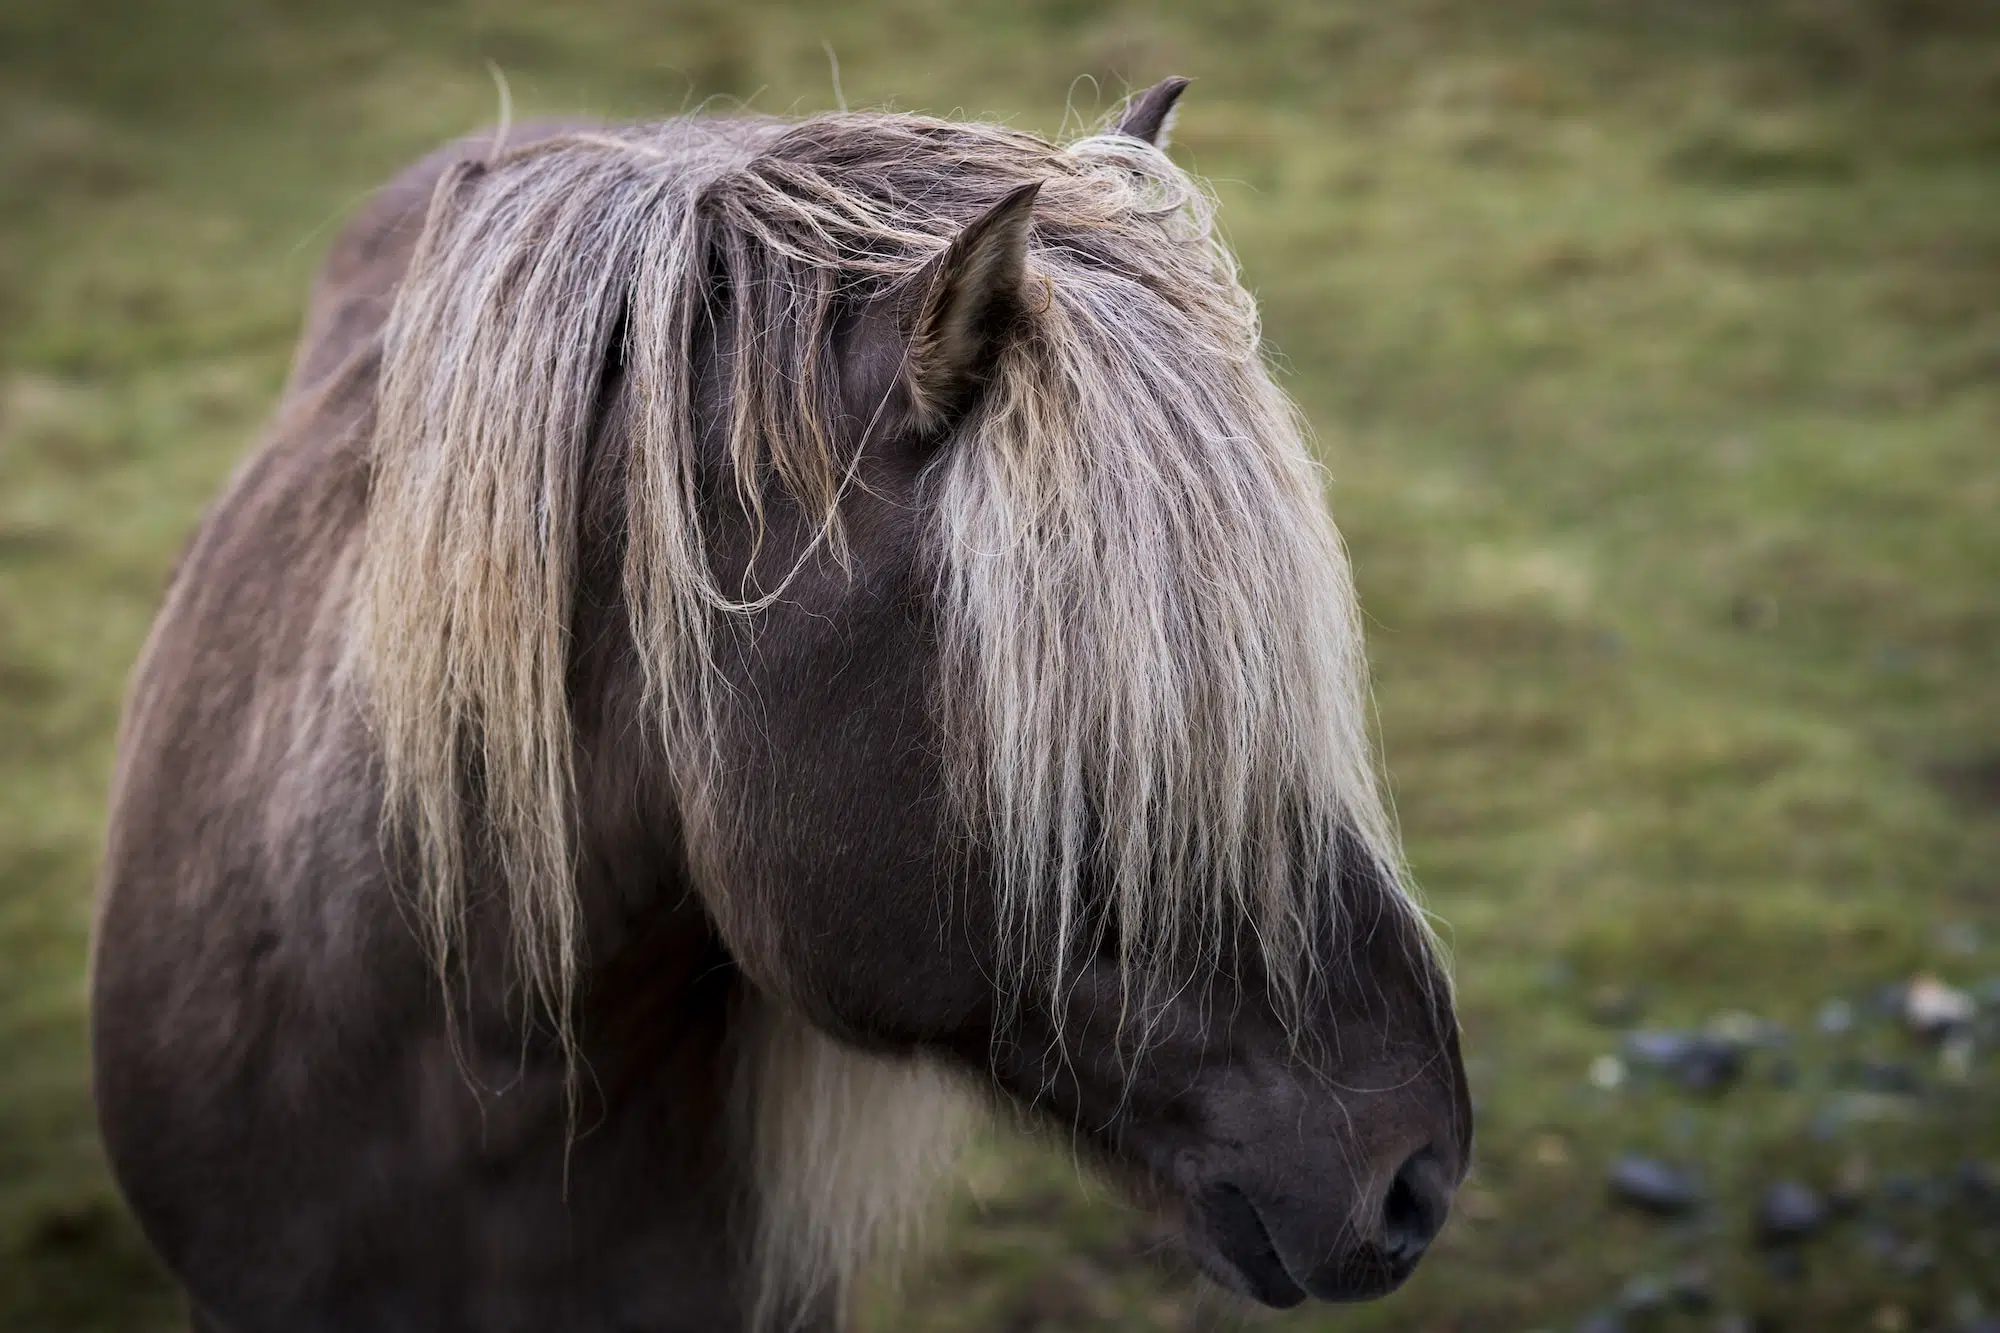 Icelandic Horse Export Suspended Following Fatal Accident